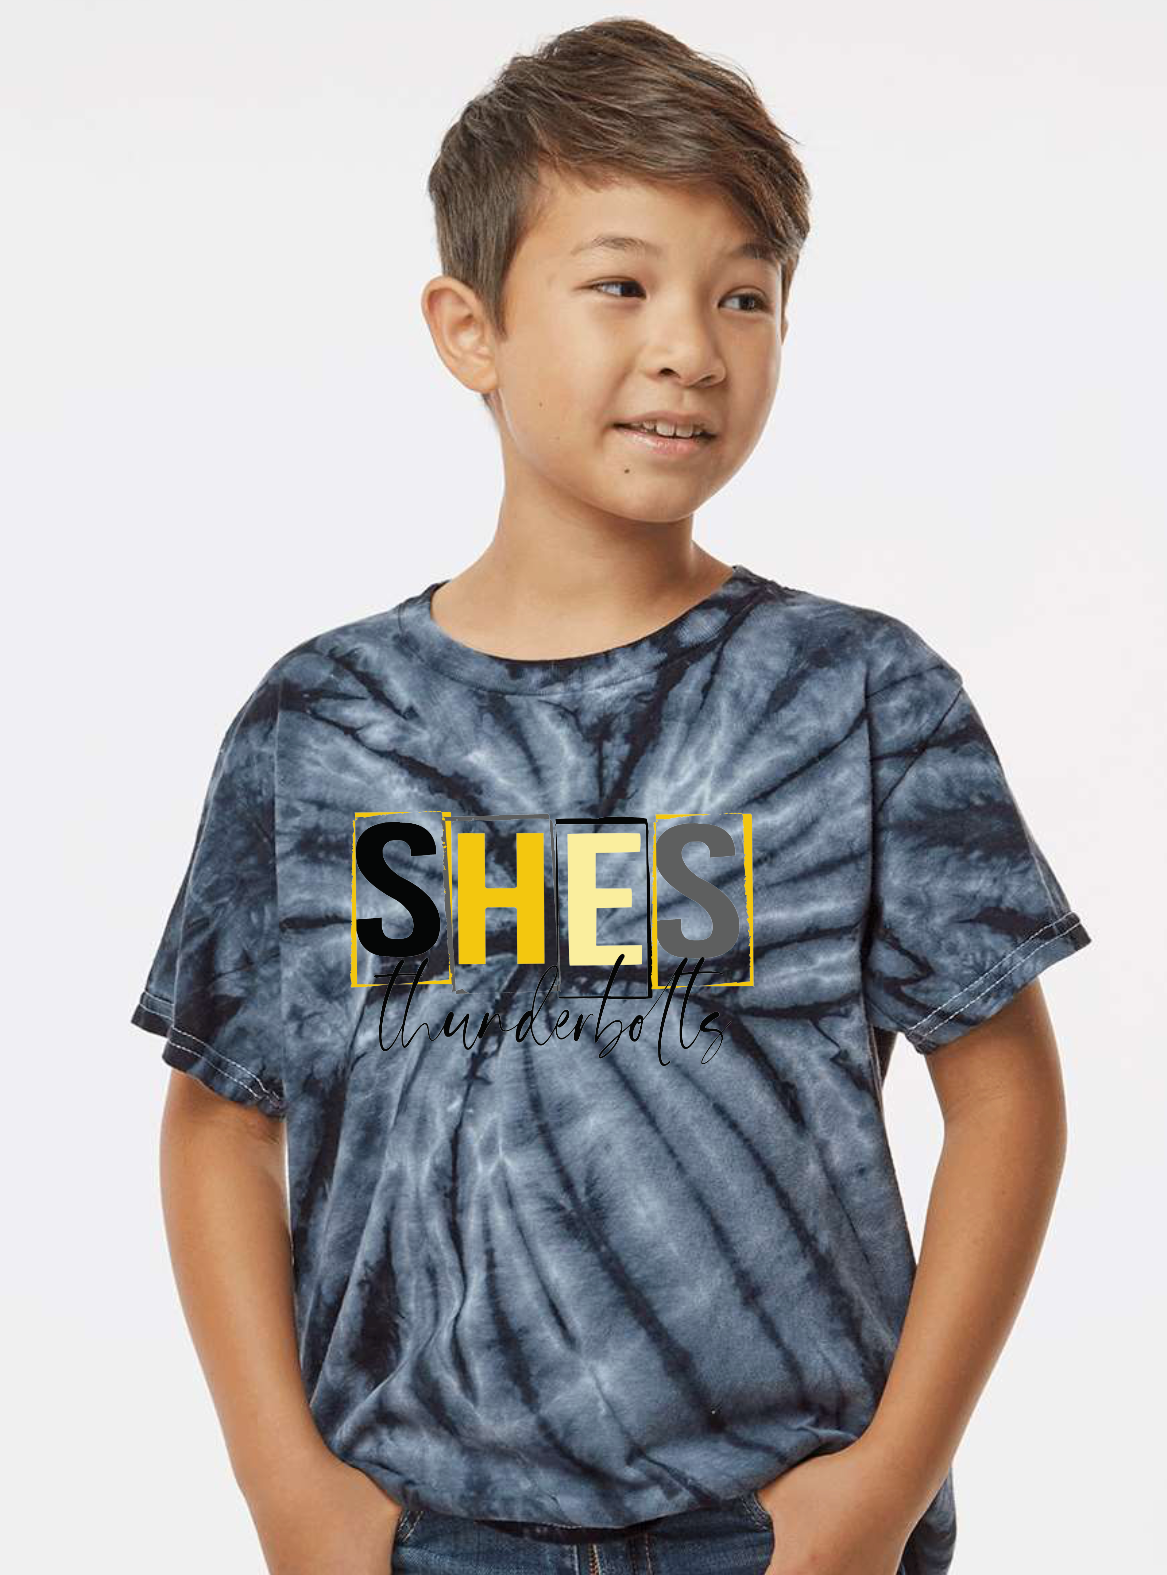 SHES Mascot Tie-Dyed T-Shirt